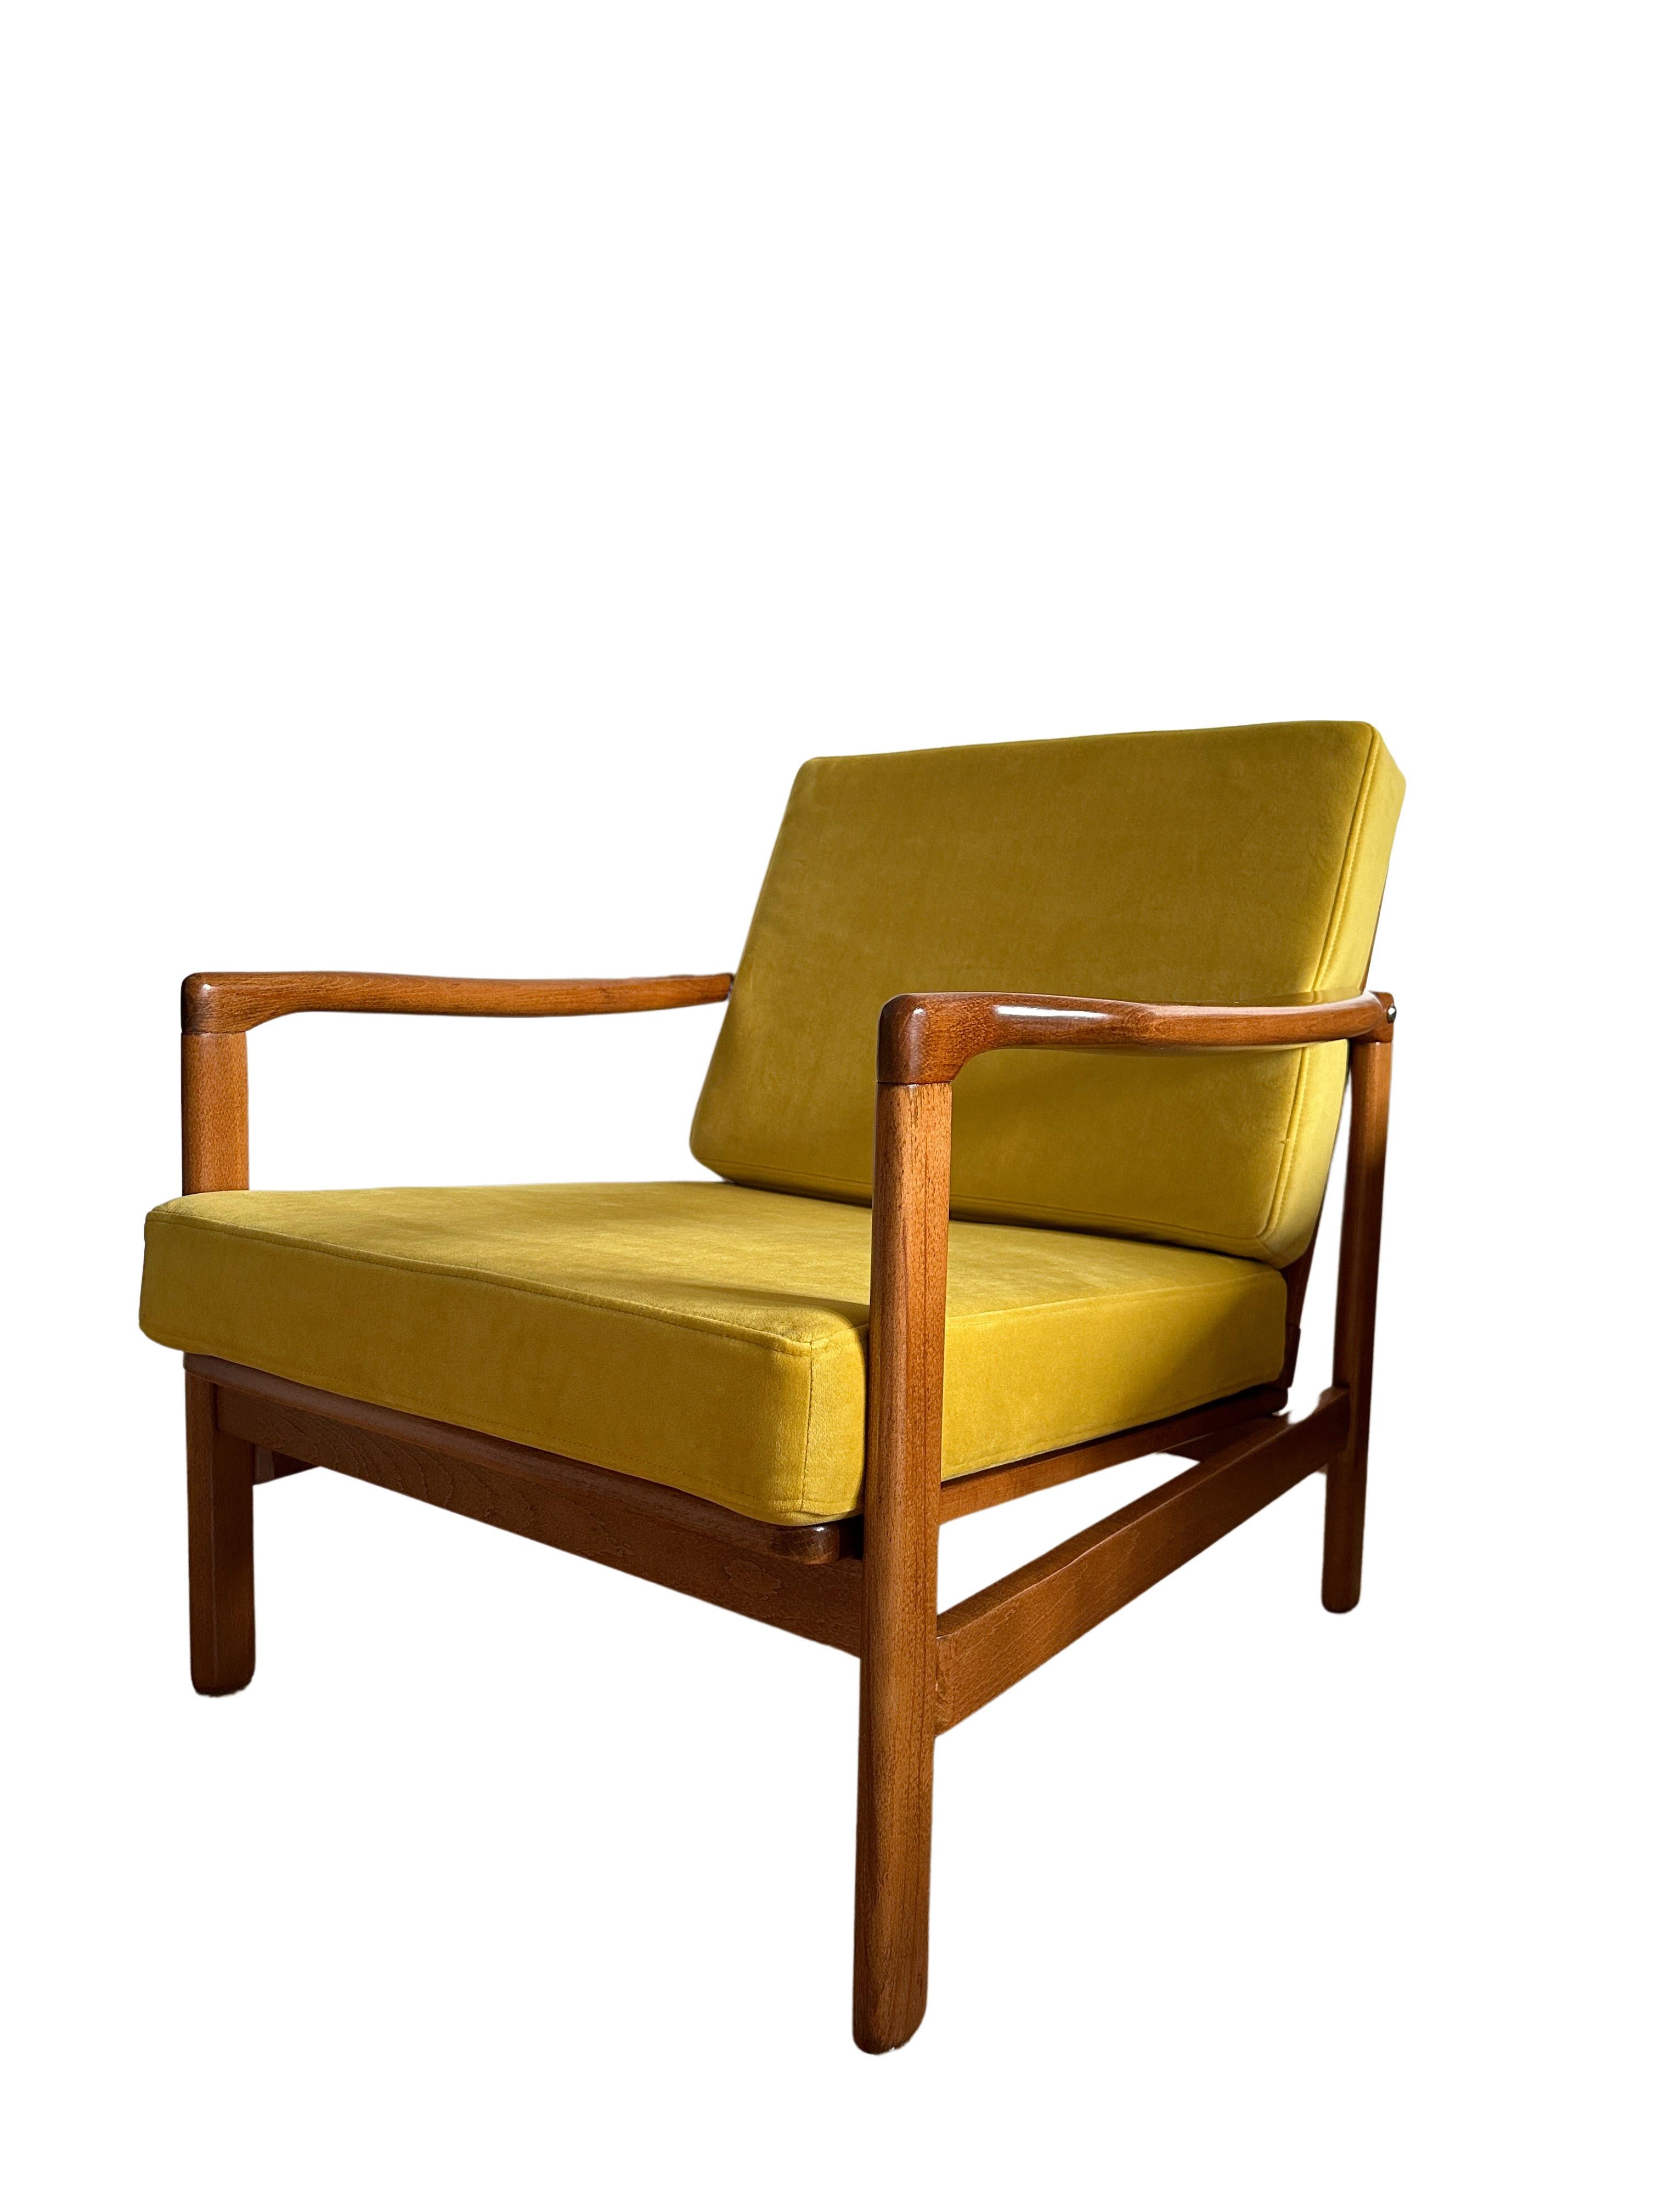 The set of two lounge chairs model B-7752, designed by Zenon Baczyk, has been manufactured by Swarzedzkie Fabryki Mebli in Poland in the 1960s. 

The structure is made of beech wood in deep honey brown color, finished with a semi matte varnish.